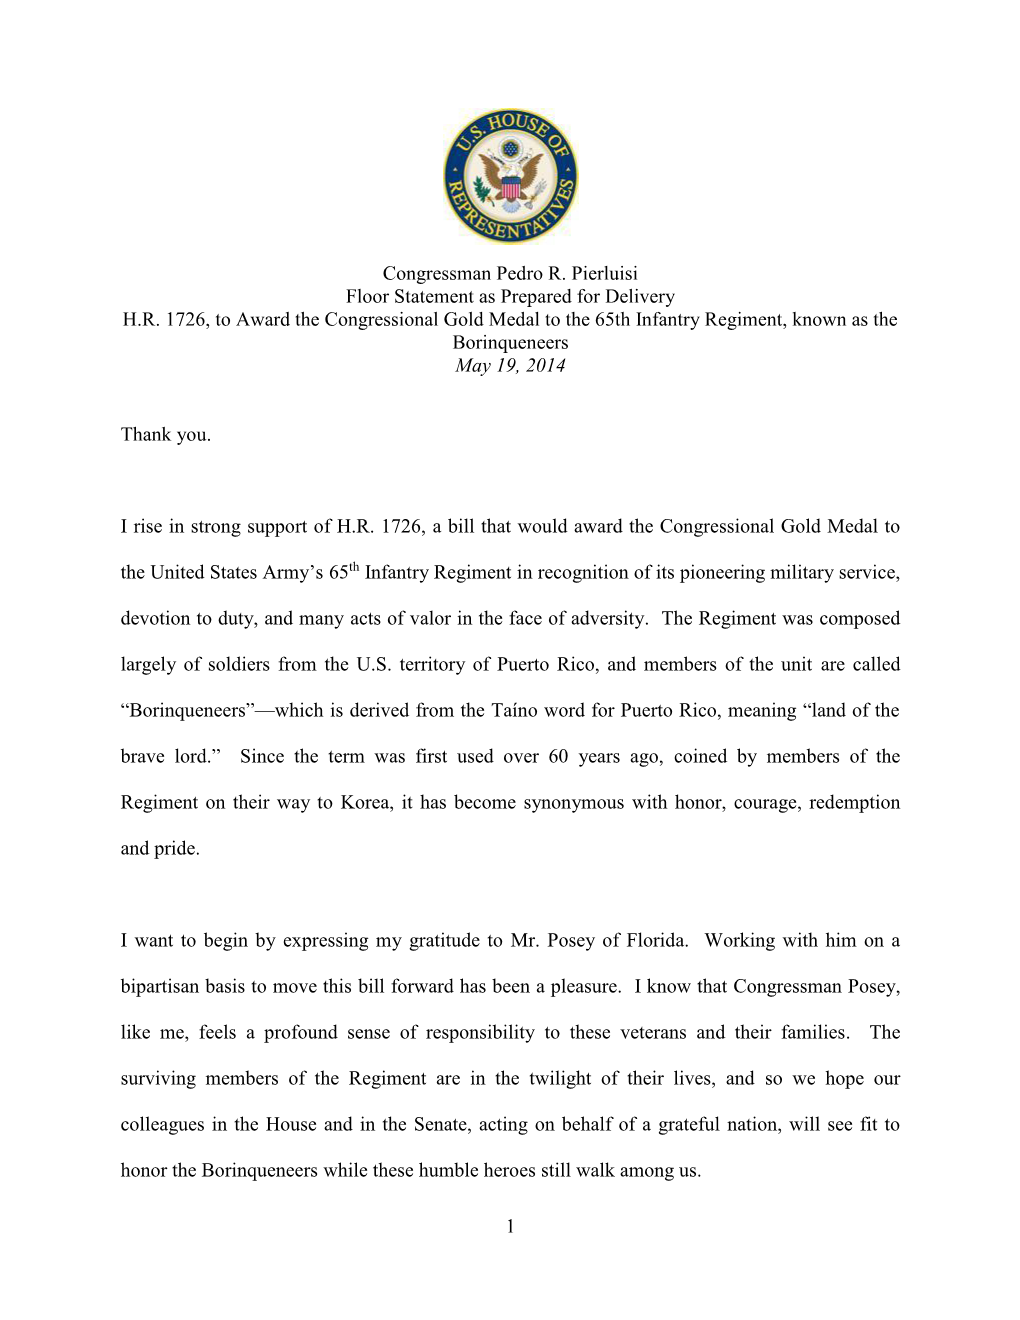 1 Congressman Pedro R. Pierluisi Floor Statement As Prepared for Delivery H.R. 1726, to Award the Congressional Gold Medal to Th